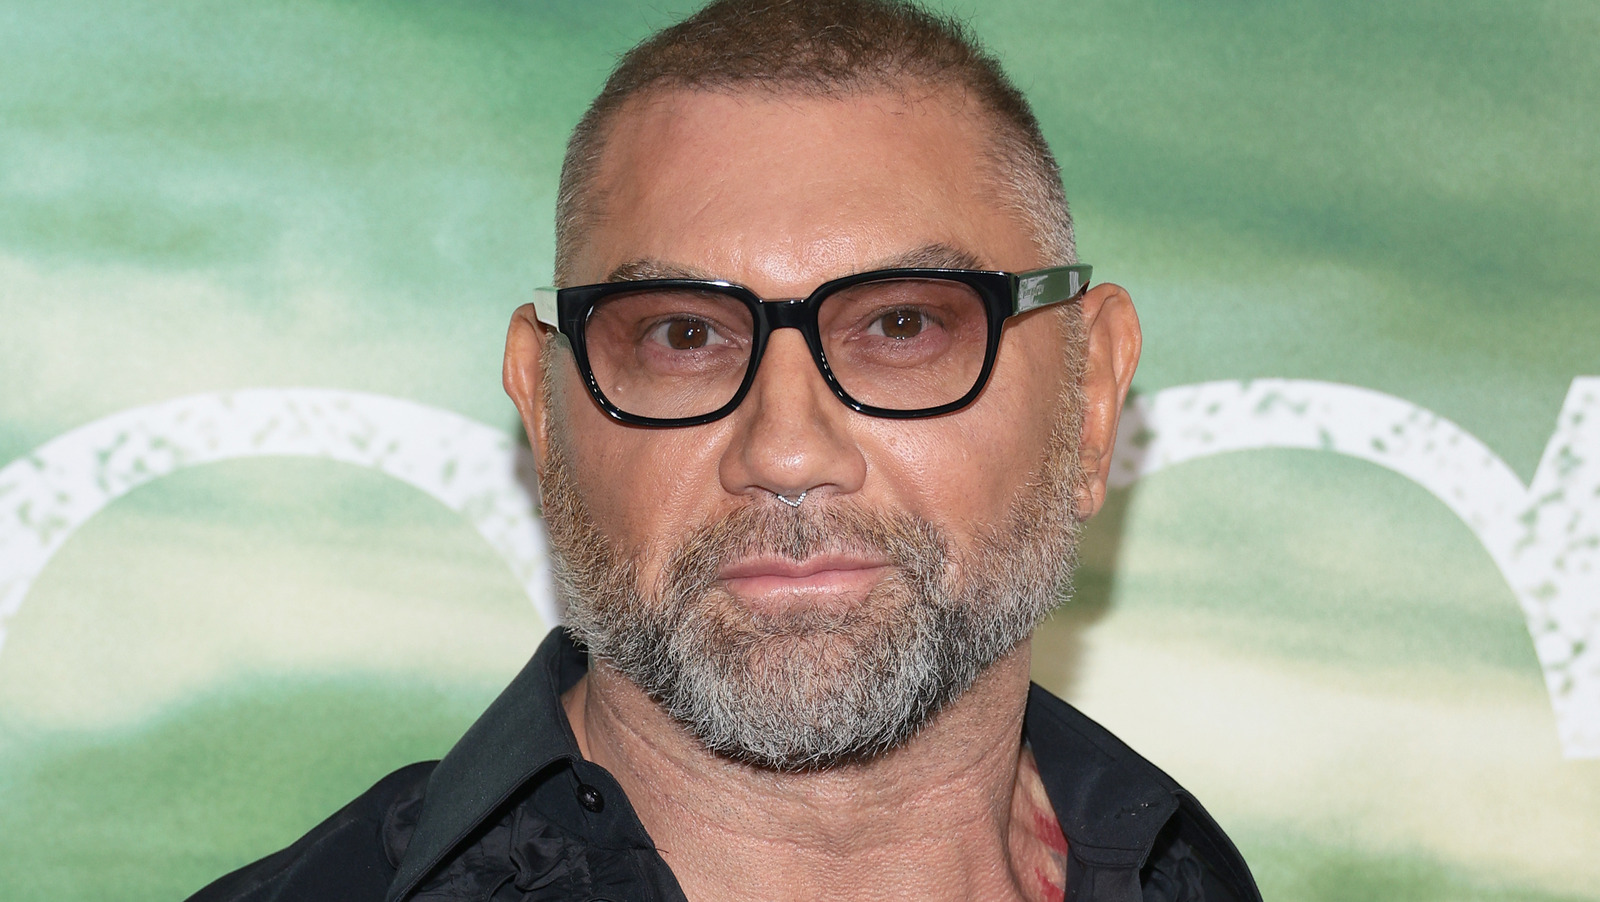 Former WWE Champion Dave Bautista To Star In New Action Film With Samuel L. Jackson